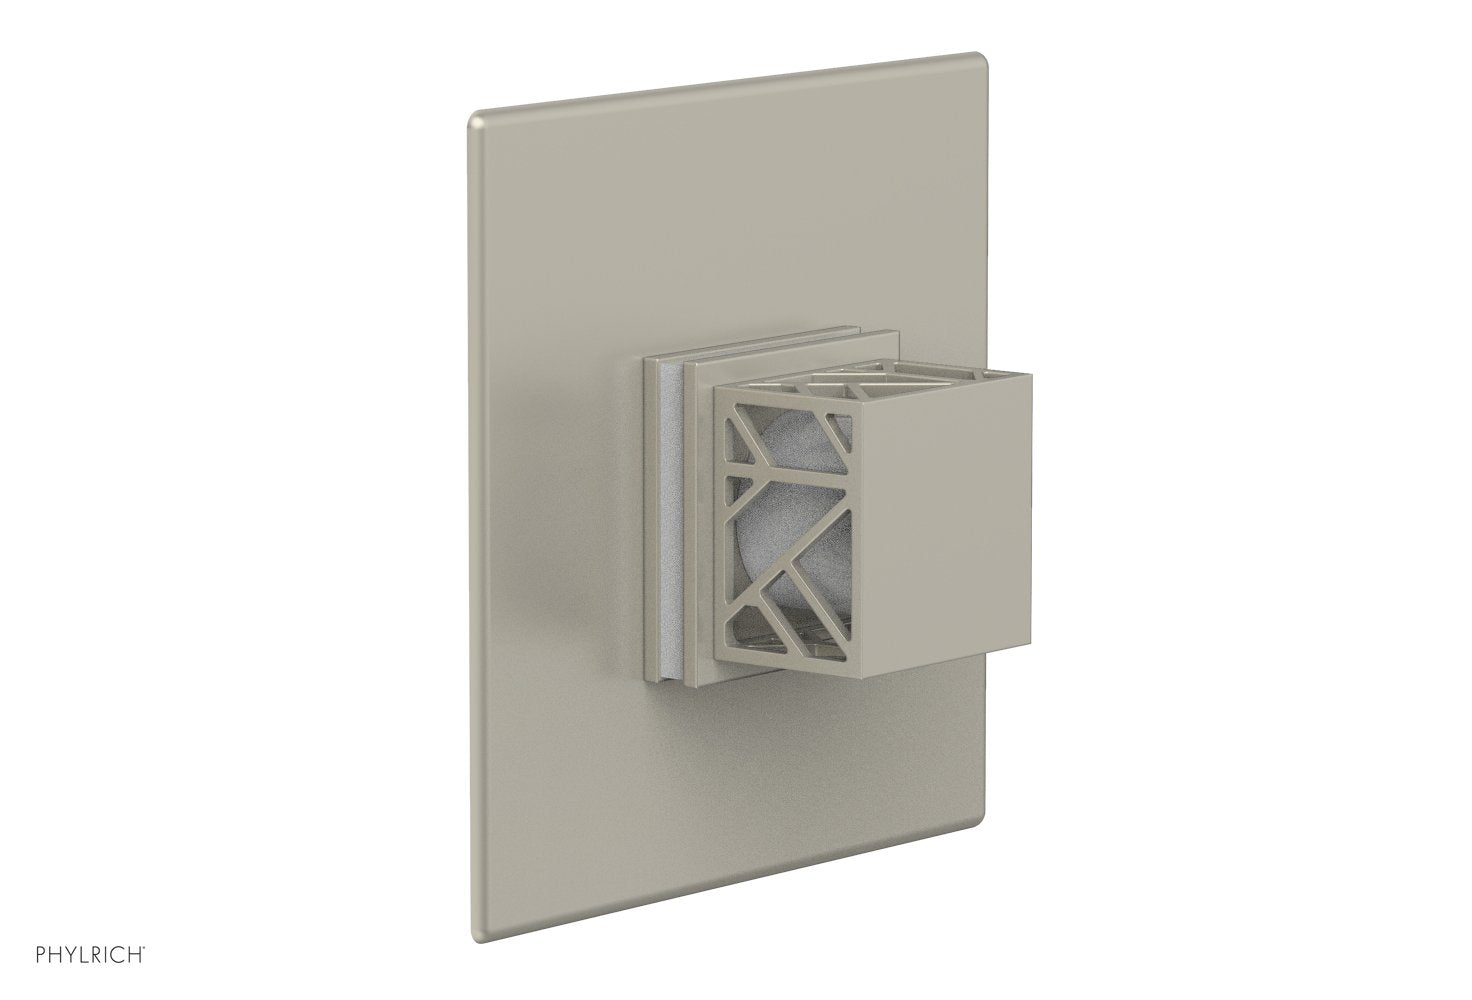 Phylrich JOLIE Pressure Balance Shower Plate & Handle Trim, Square Handle with "White" Accents